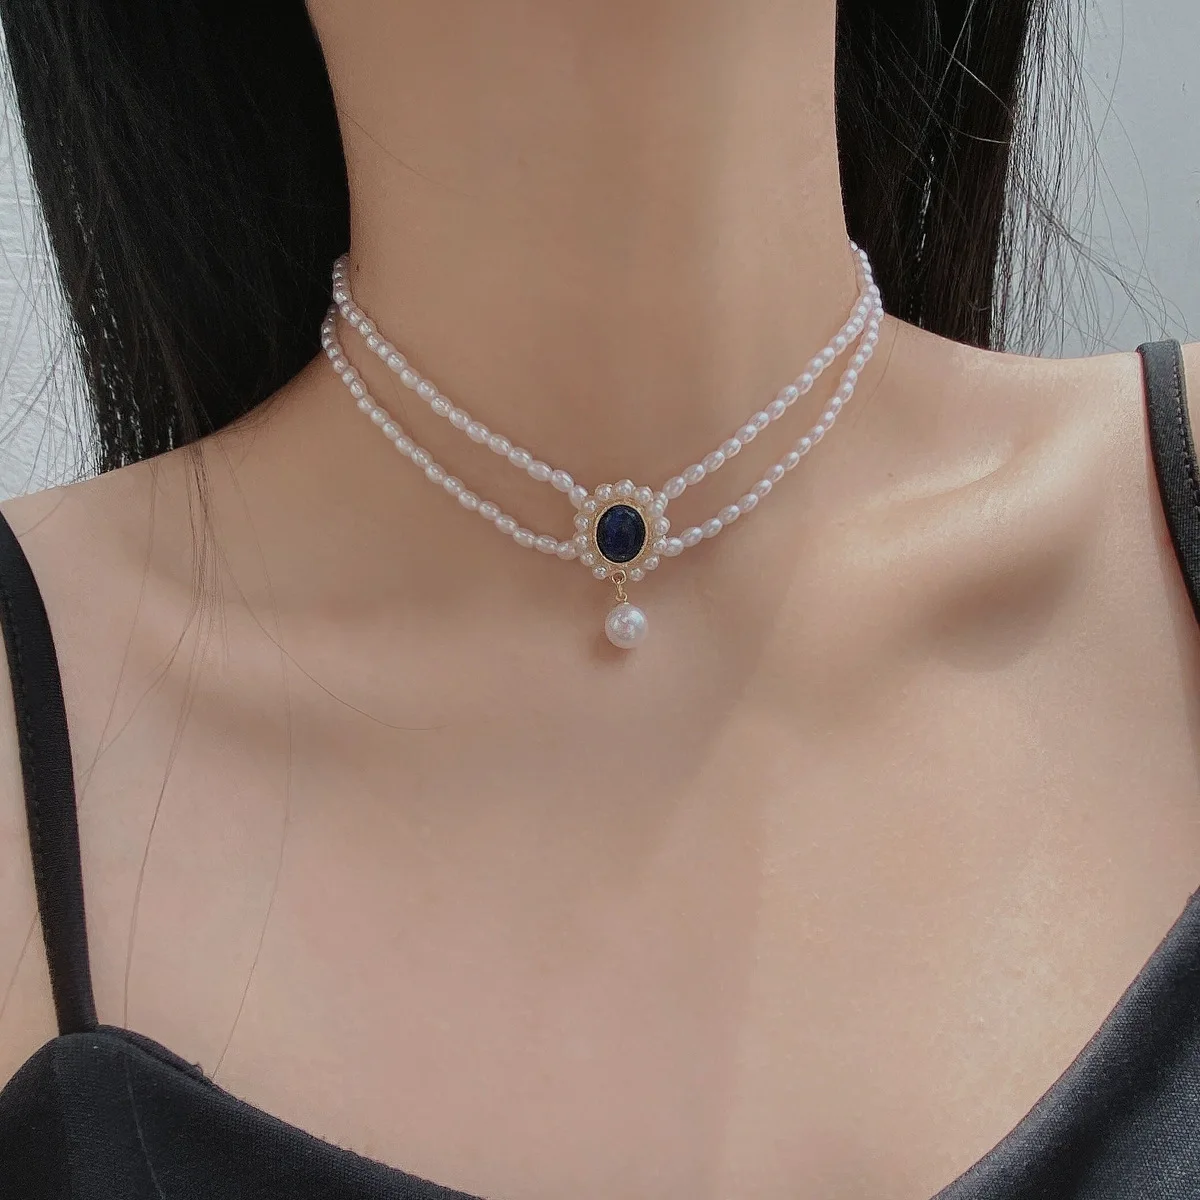 

Baroque Pearl Gem Choker Necklaces for Women Double Layer Pearl Charm Choker Pendant Necklaces Boho Jewelry Christmas Gift New